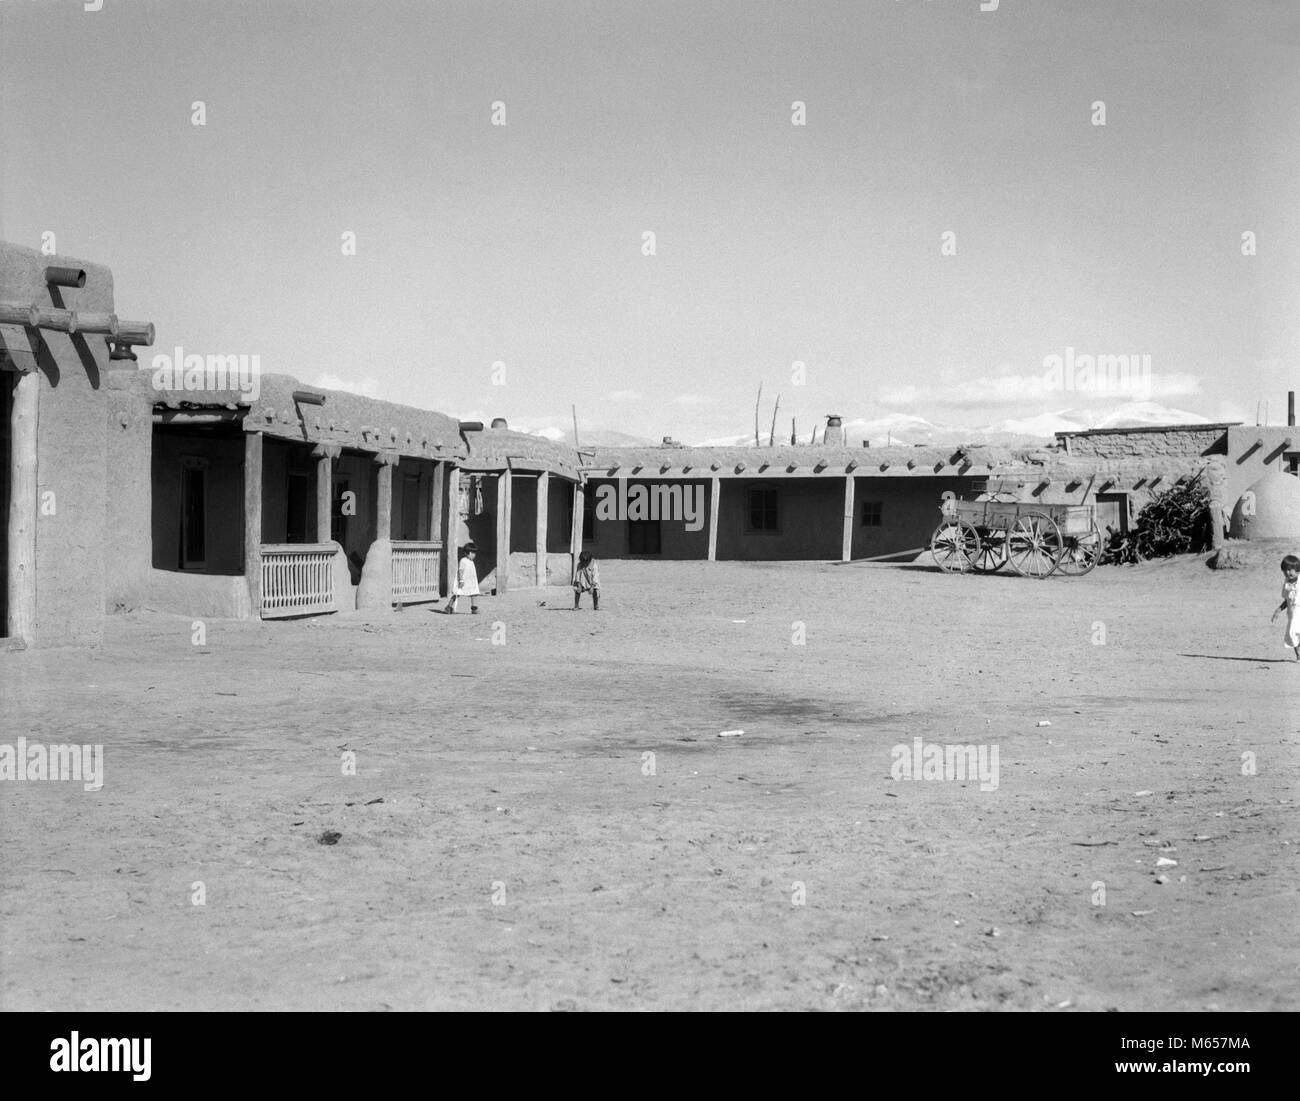 1930s ADOBE BUILDINGS ARCHITECTURE OF NORTH PLAZA OF SAN ILDEFONSO PUEBLO NEW MEXICO USA - i1644 HAR001 HARS ARCHITECTURAL DETAIL HERITAGE NATIVE AMERICANS NEW MEXICO B&W BLACK AND WHITE ILDEFONSO NM OLD FASHIONED PORTICO Stock Photo